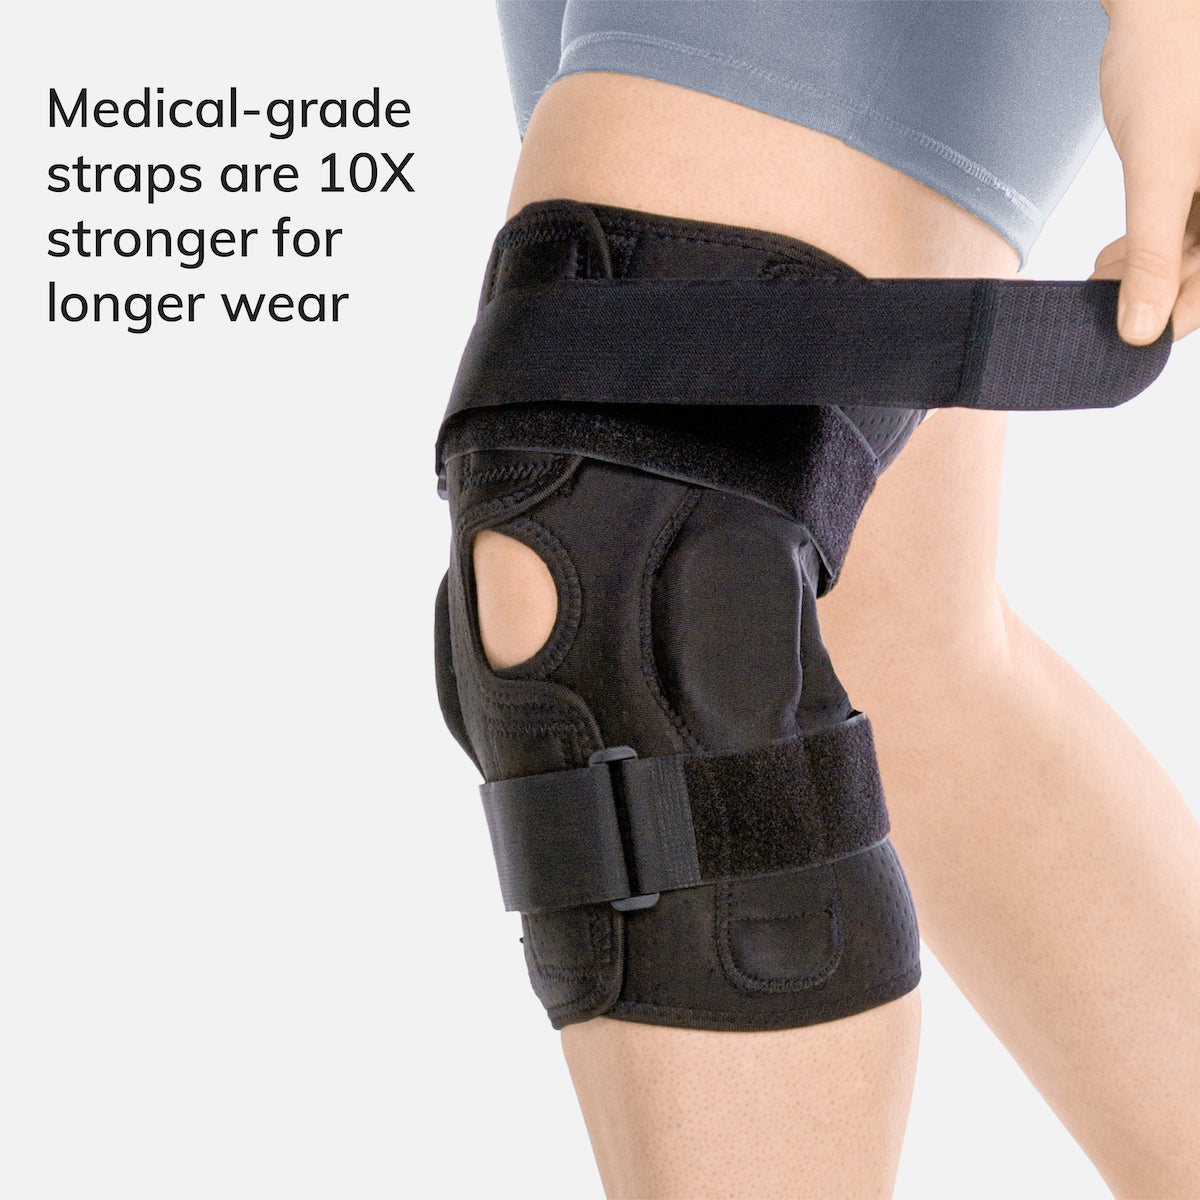 finger loops make the application of the knee hyperextension brace fast and easy